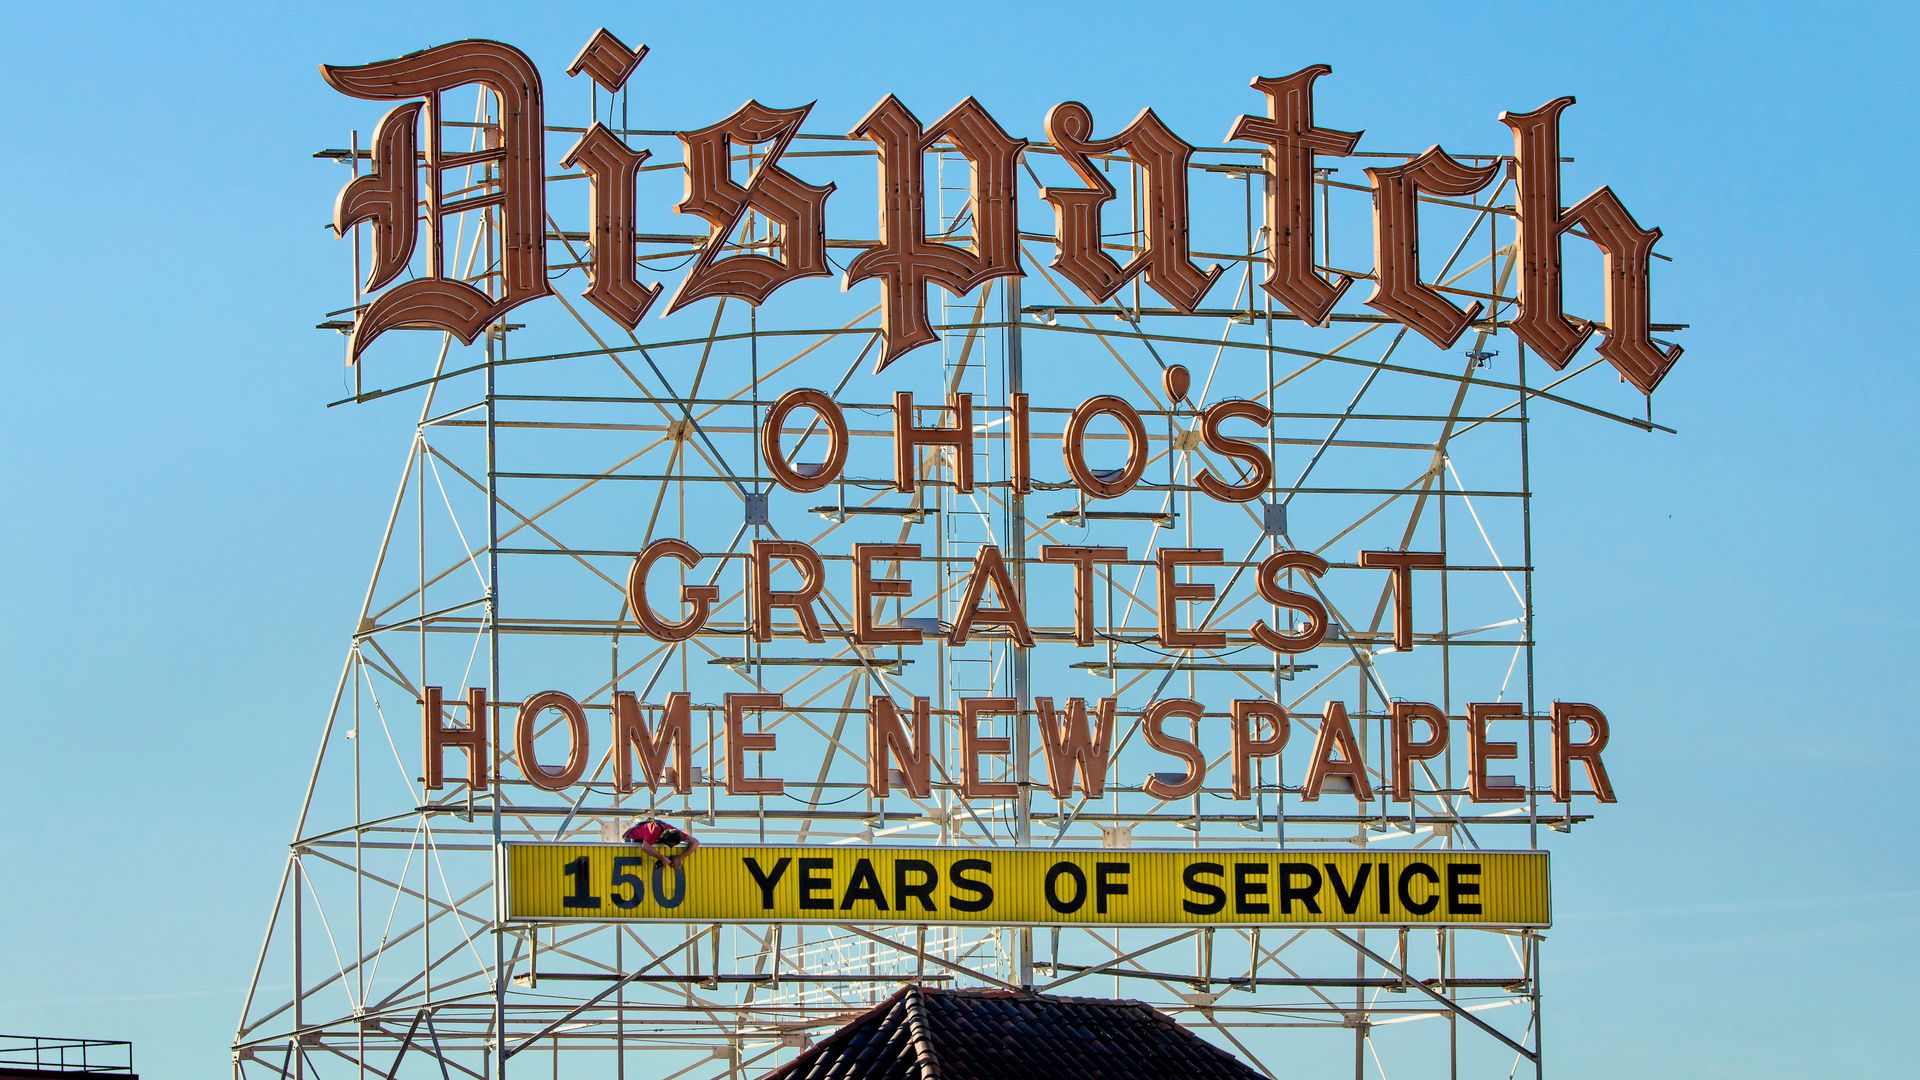 A neon sign reading "Dispatch, Ohio's Greatest Home Newspaper, 150 Years of Service"